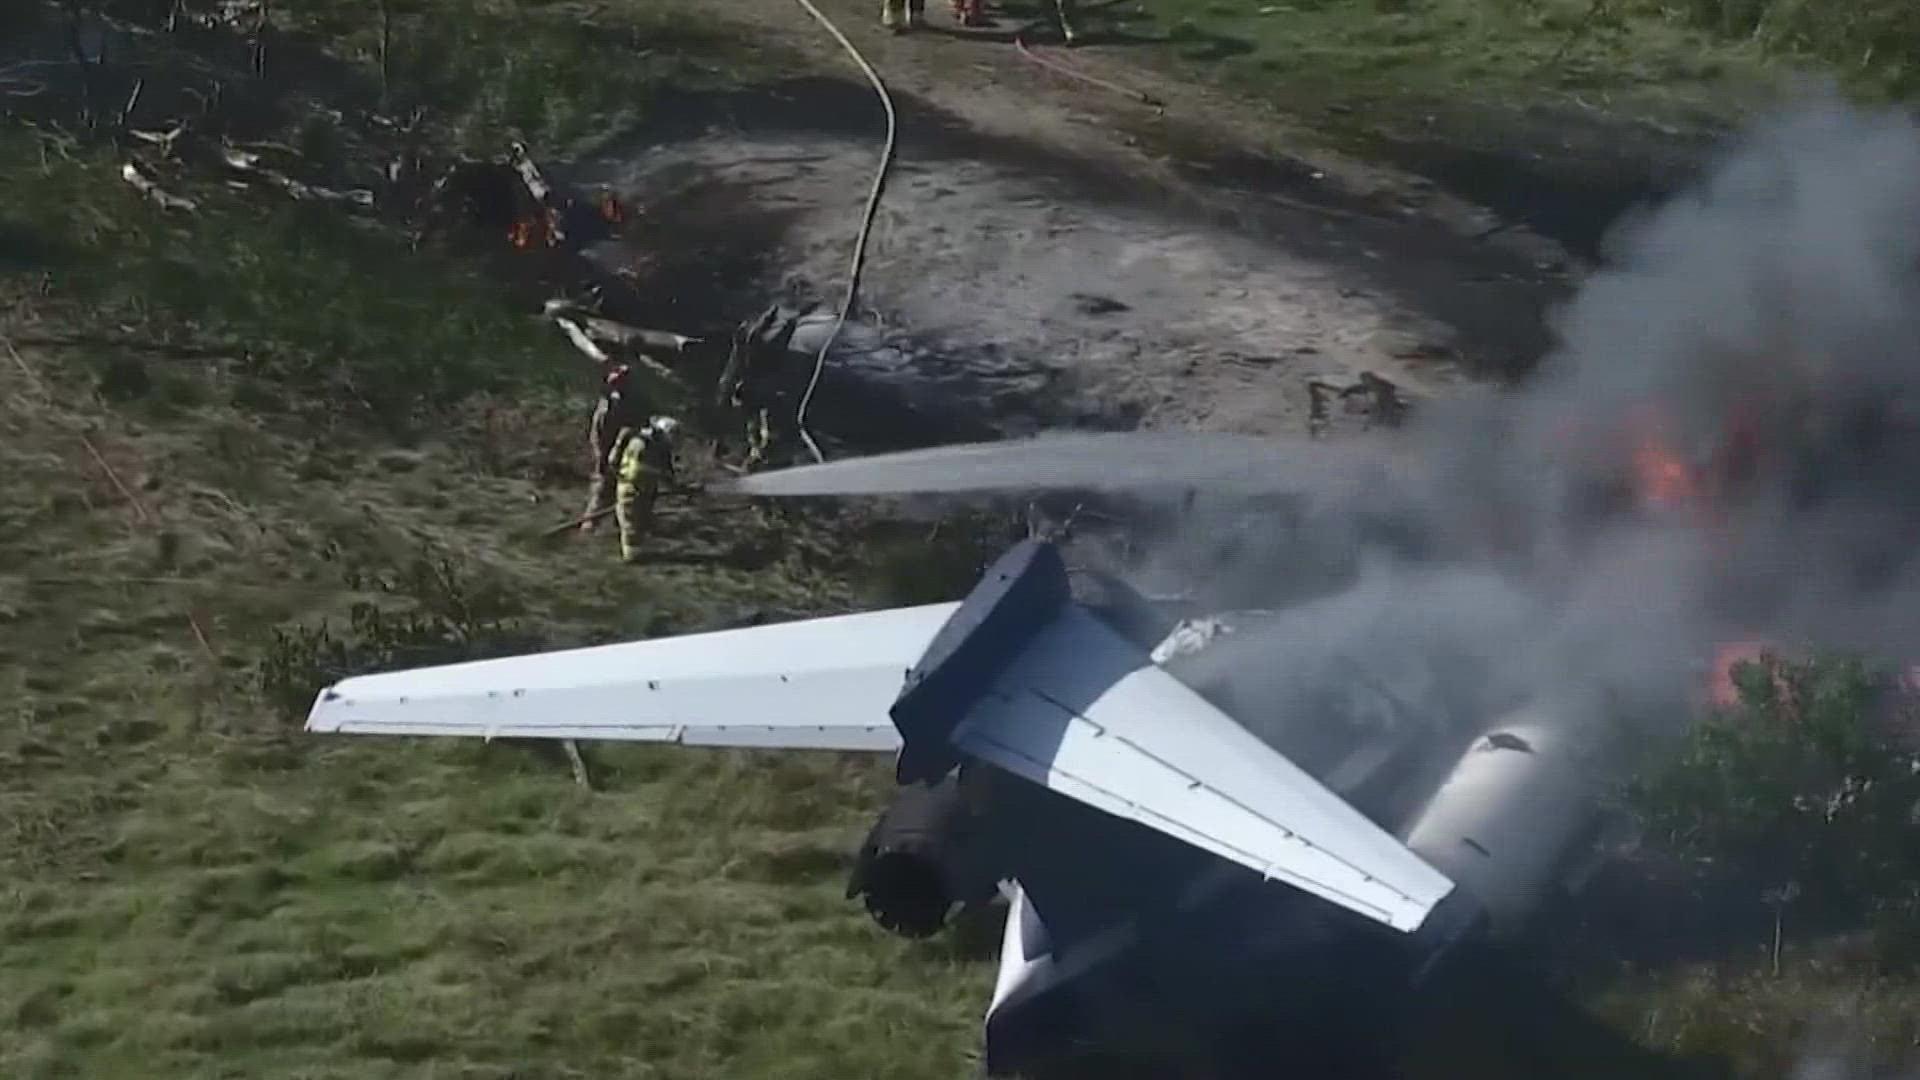 The NTSB will begin their investigation into the fiery plane crash that happened near Houston Tuesday. All 21 people on board survived the crash.